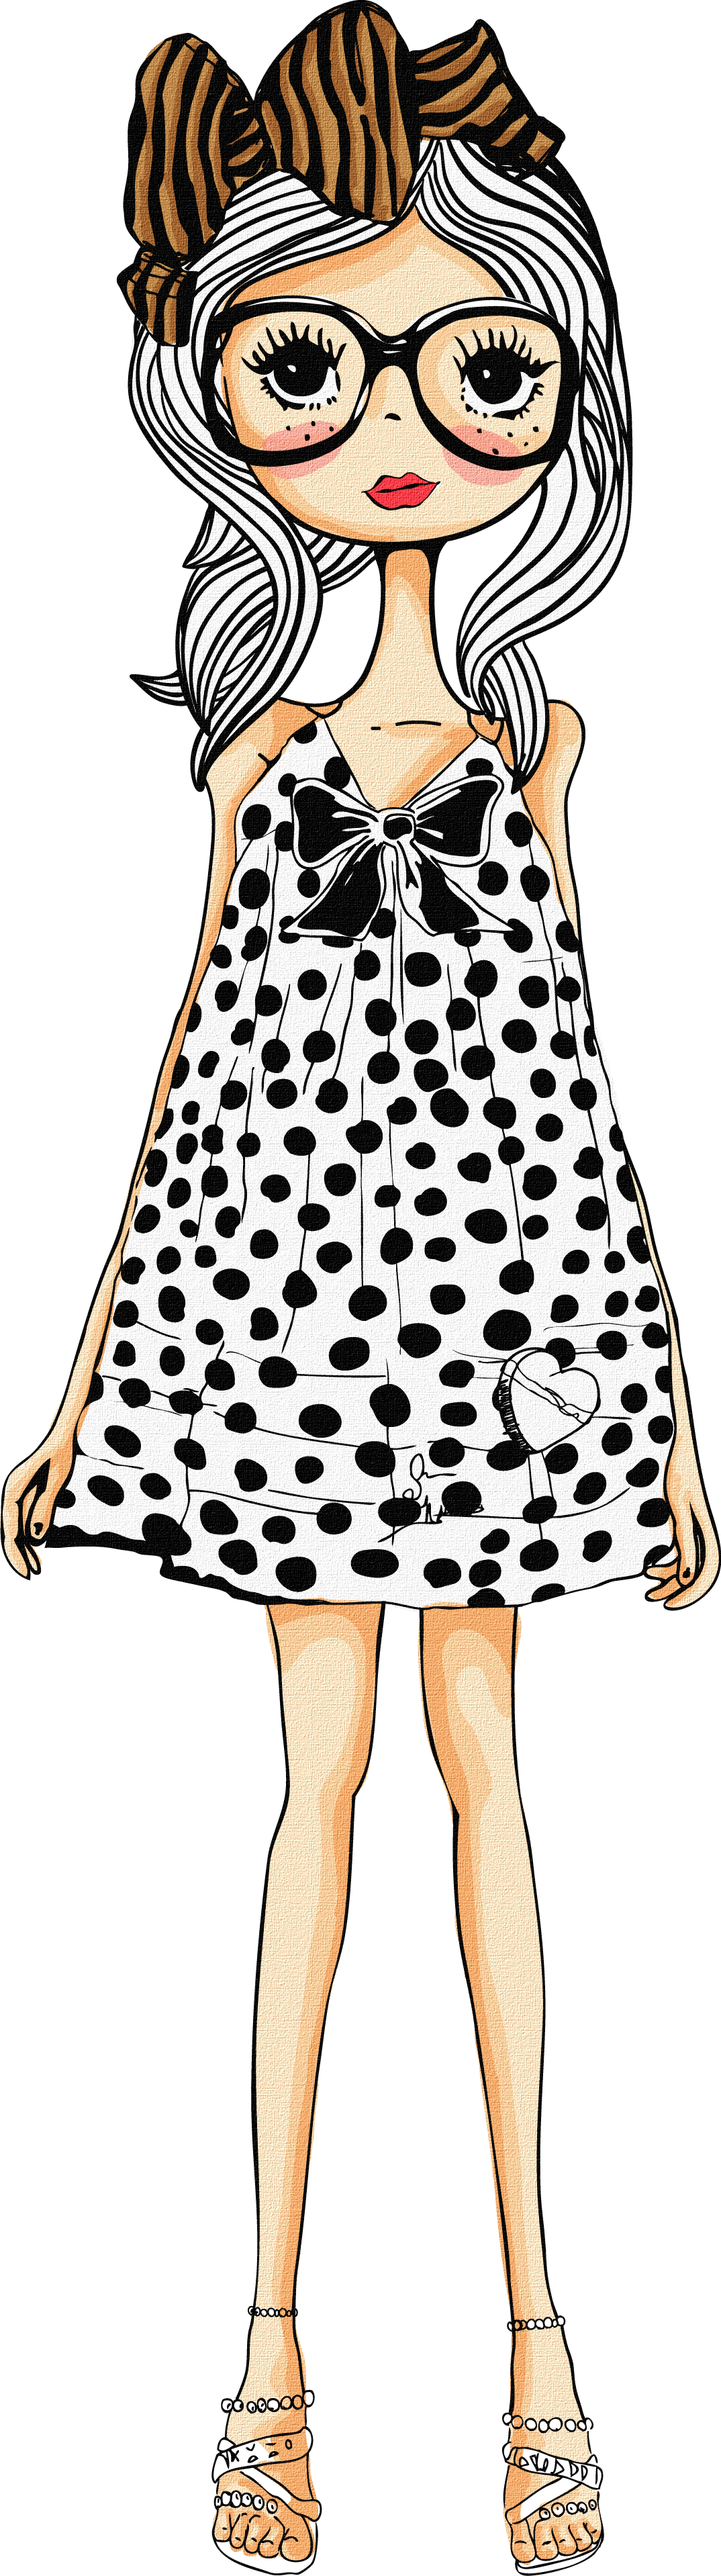 Hippie clipart 80's fashion. Doll png by julii